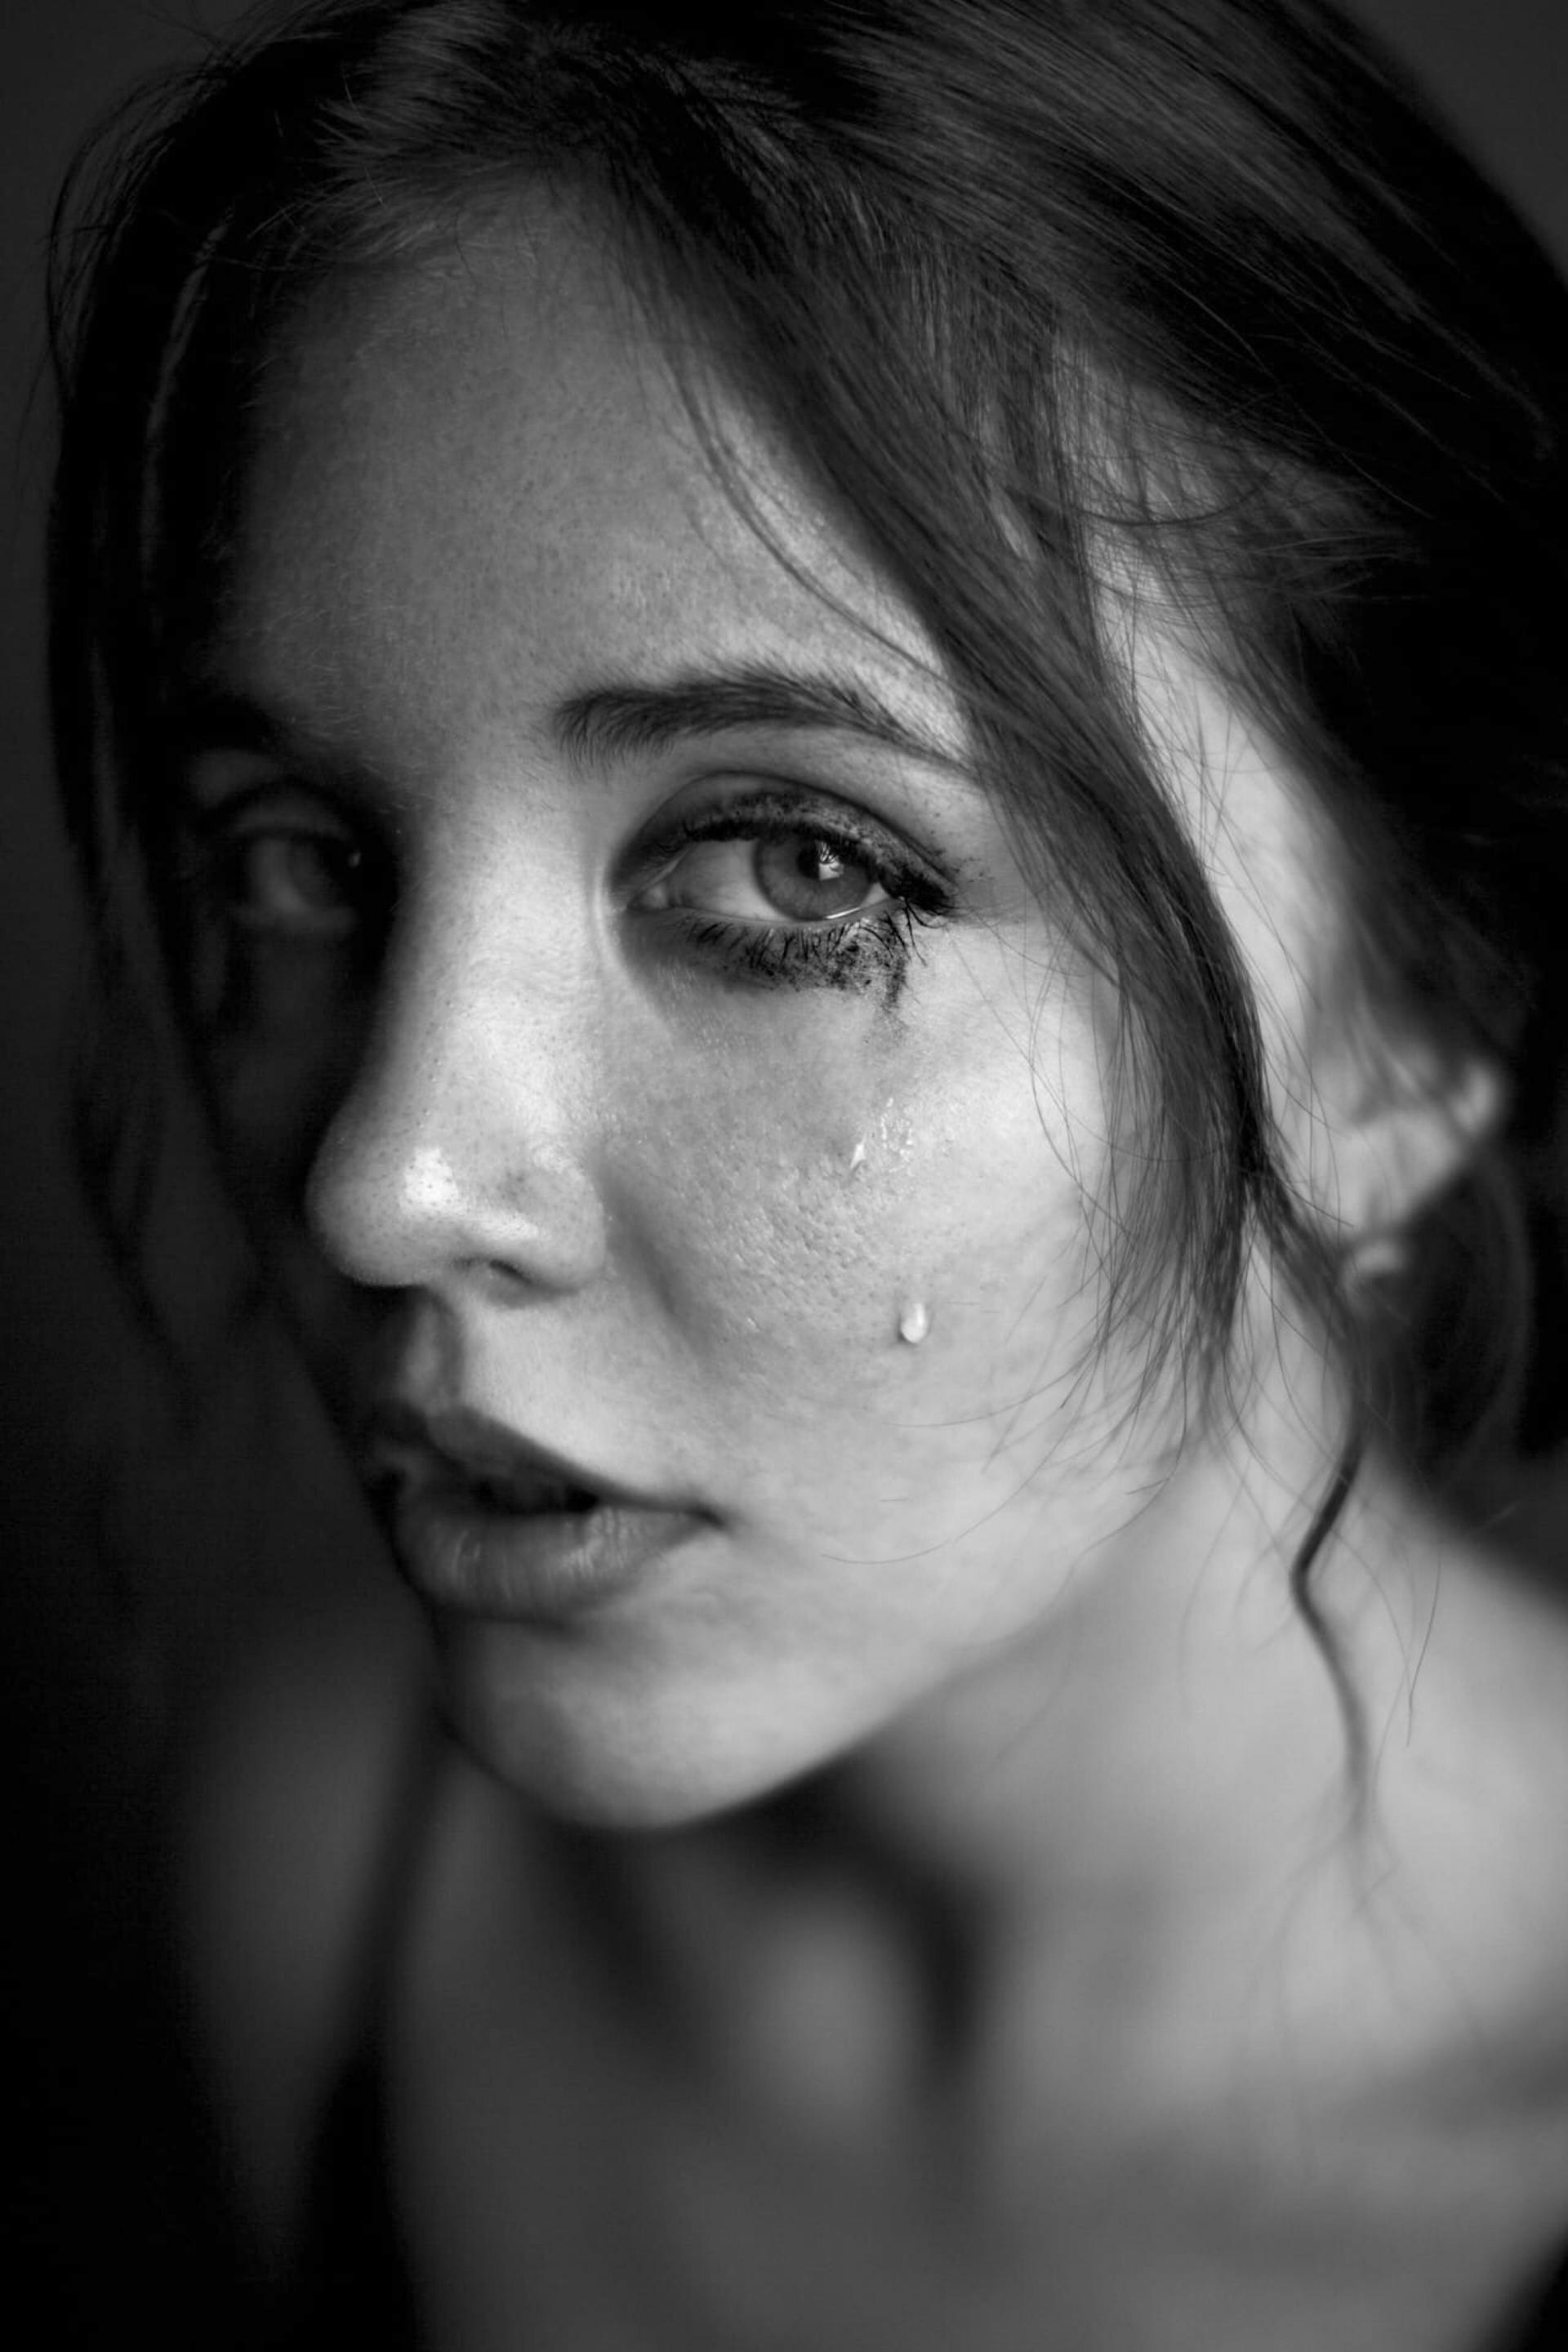 An upset woman with teary eyes | Source: Pexels